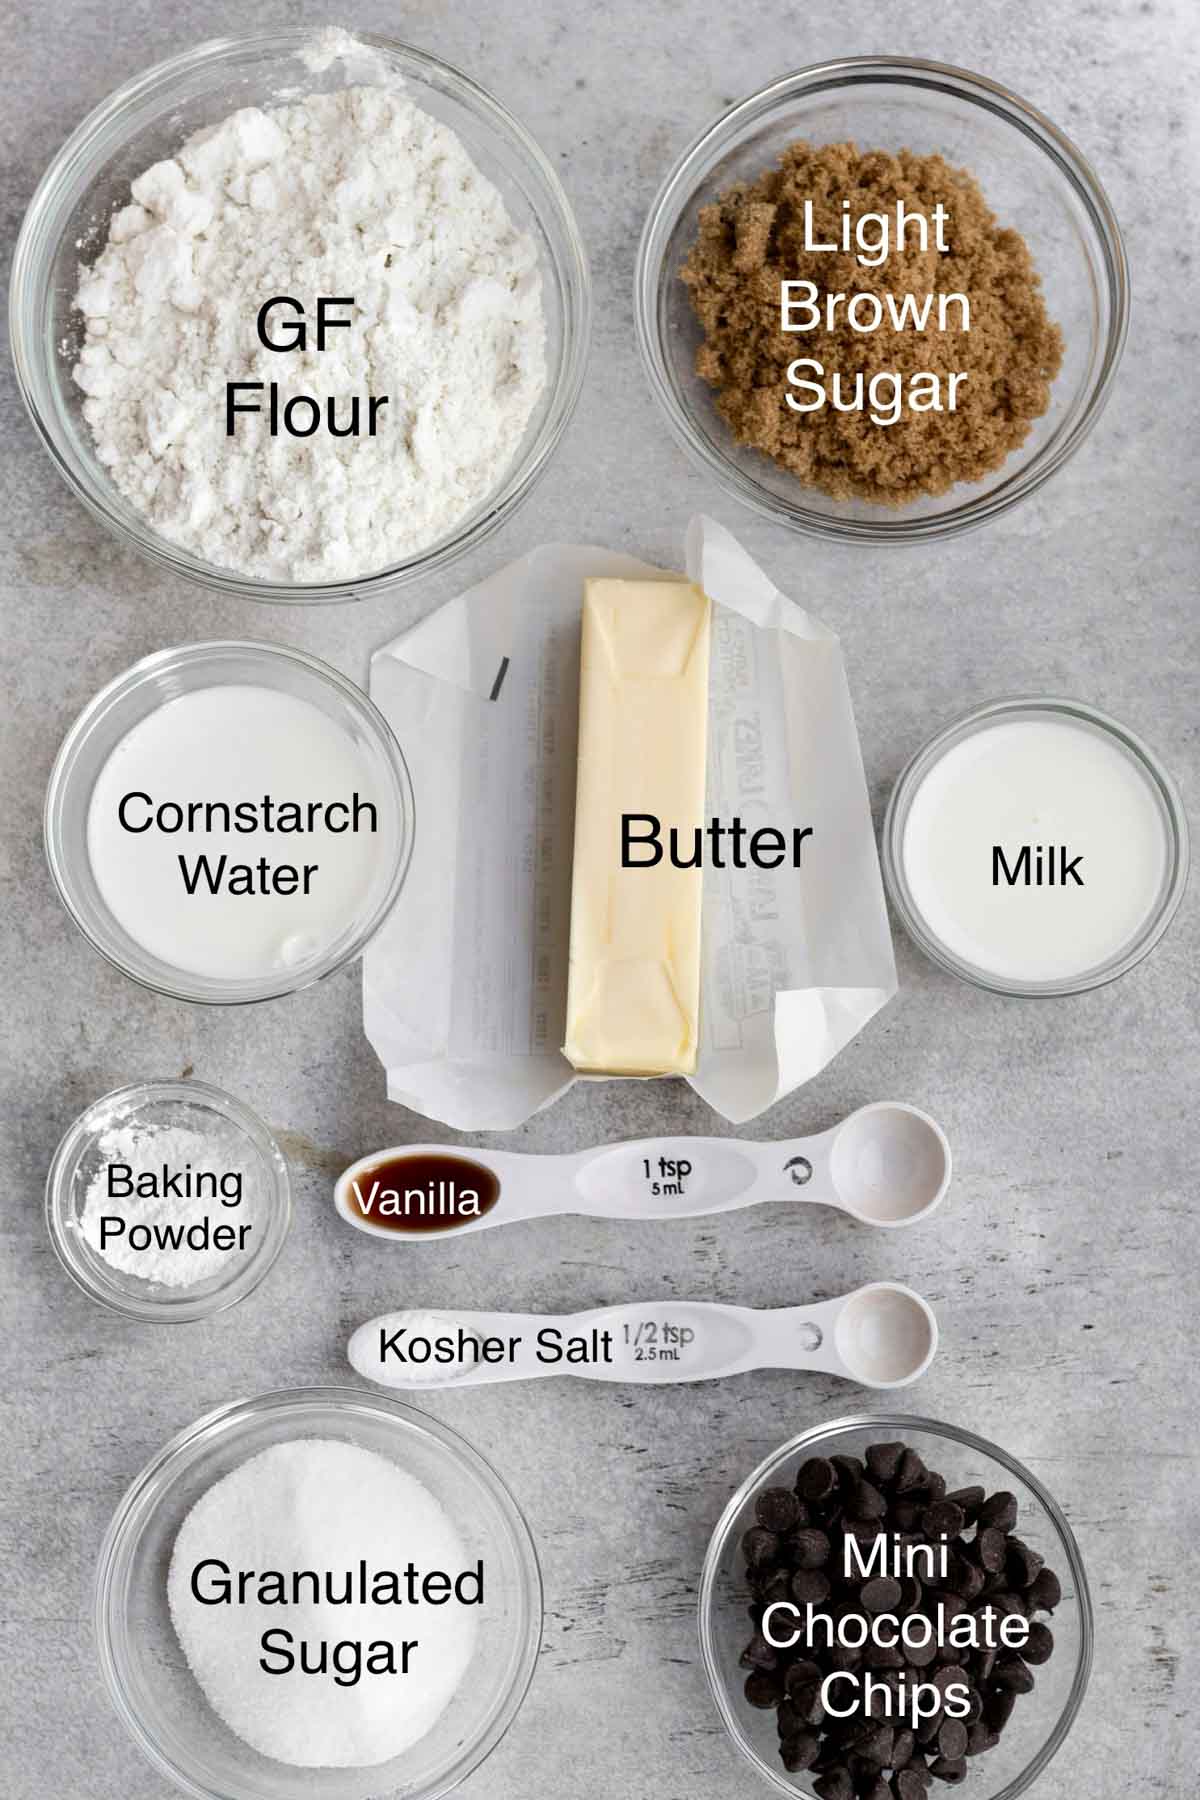 The ingredients for Chocolate chip sugar cookies which are gluten free flour, light brown sugar, cornstarch water, butter, milk, baking powder, vanilla, kosher salt, granulated sugar and mini chocolate chips in separate containers.